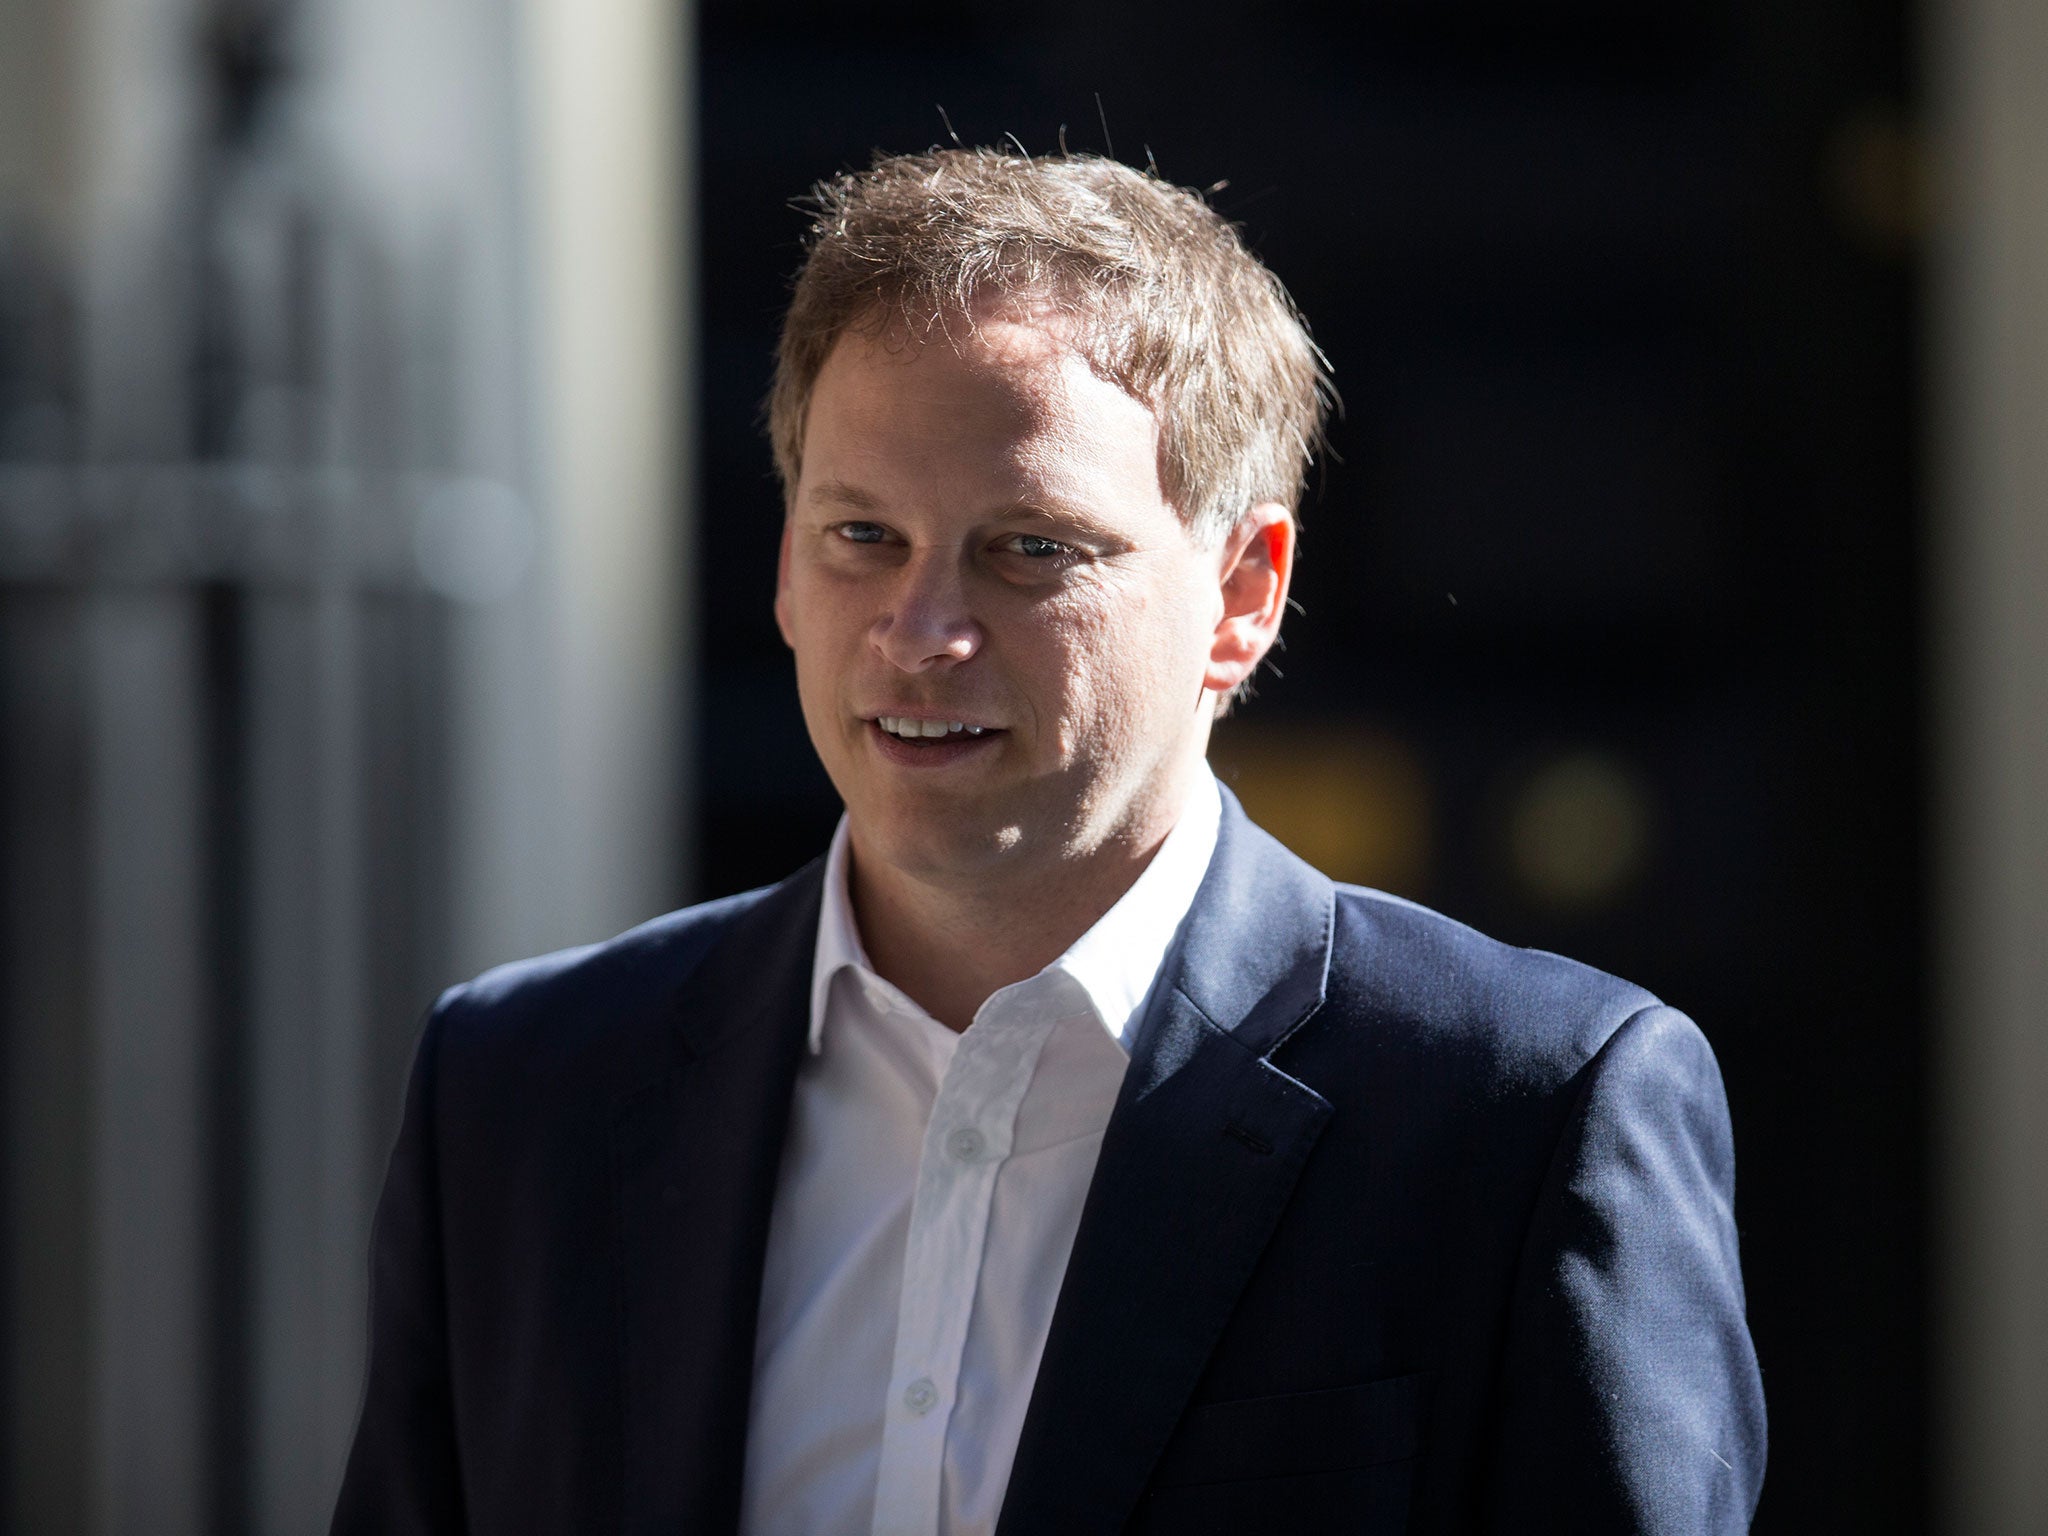 His remarks were made when Mr Shapps was asked if he could rule out a coalition deal with Nigel Farage's party.